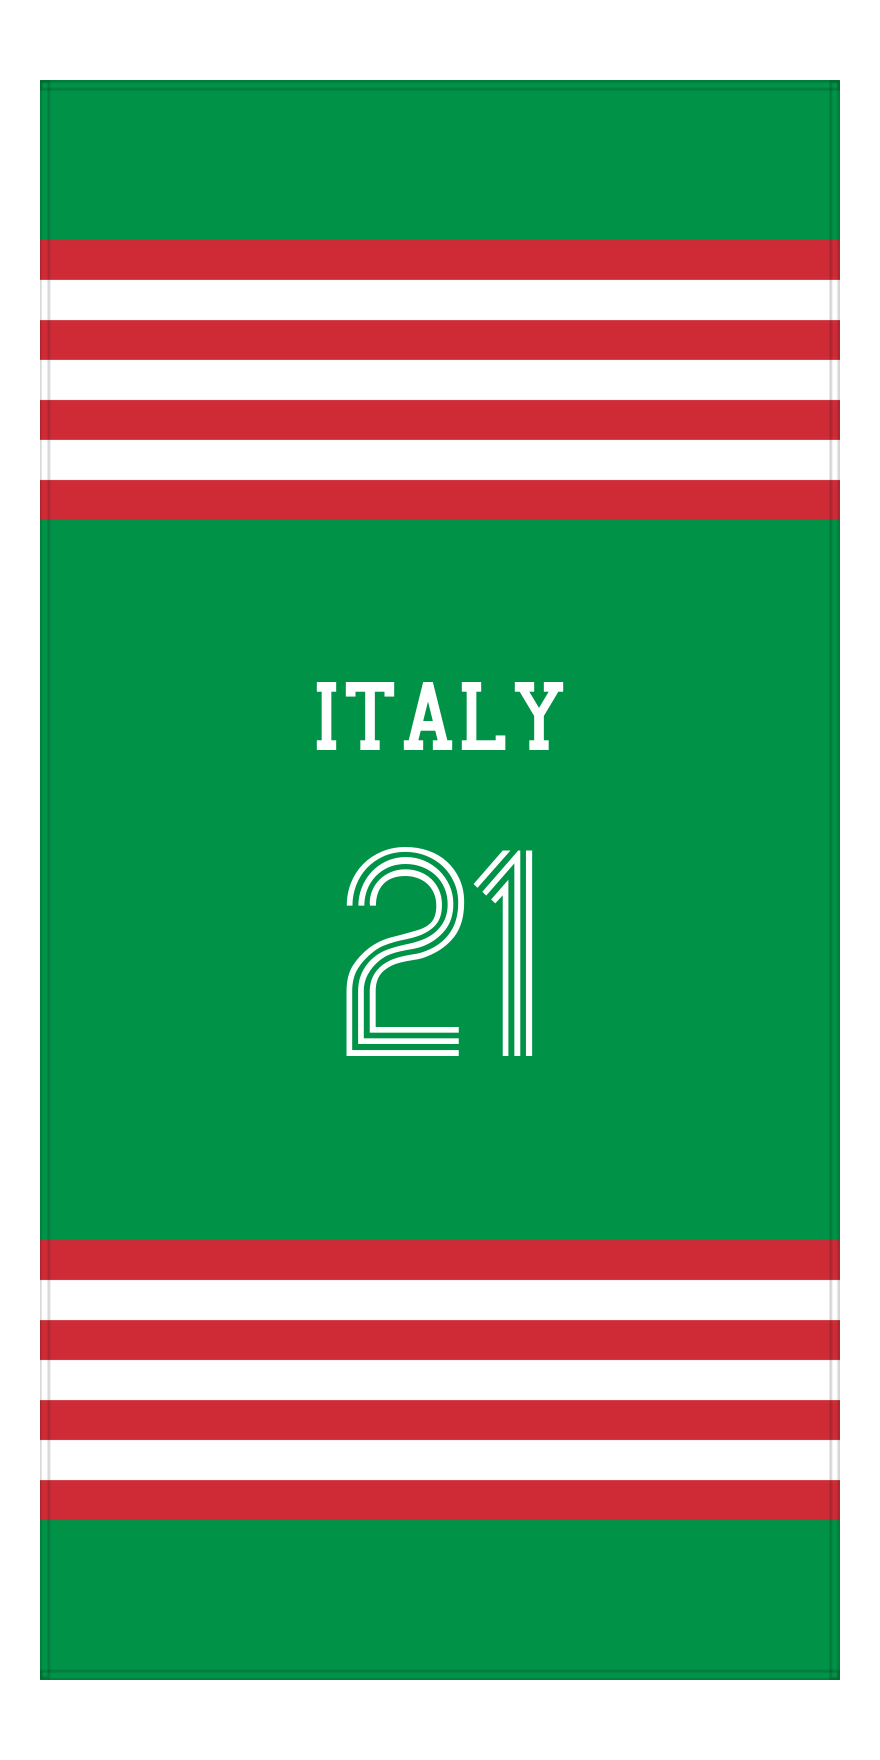 Personalized Jersey Number 3-on-1 Stripes Sports Beach Towel - Italy - Vertical Design - Front View